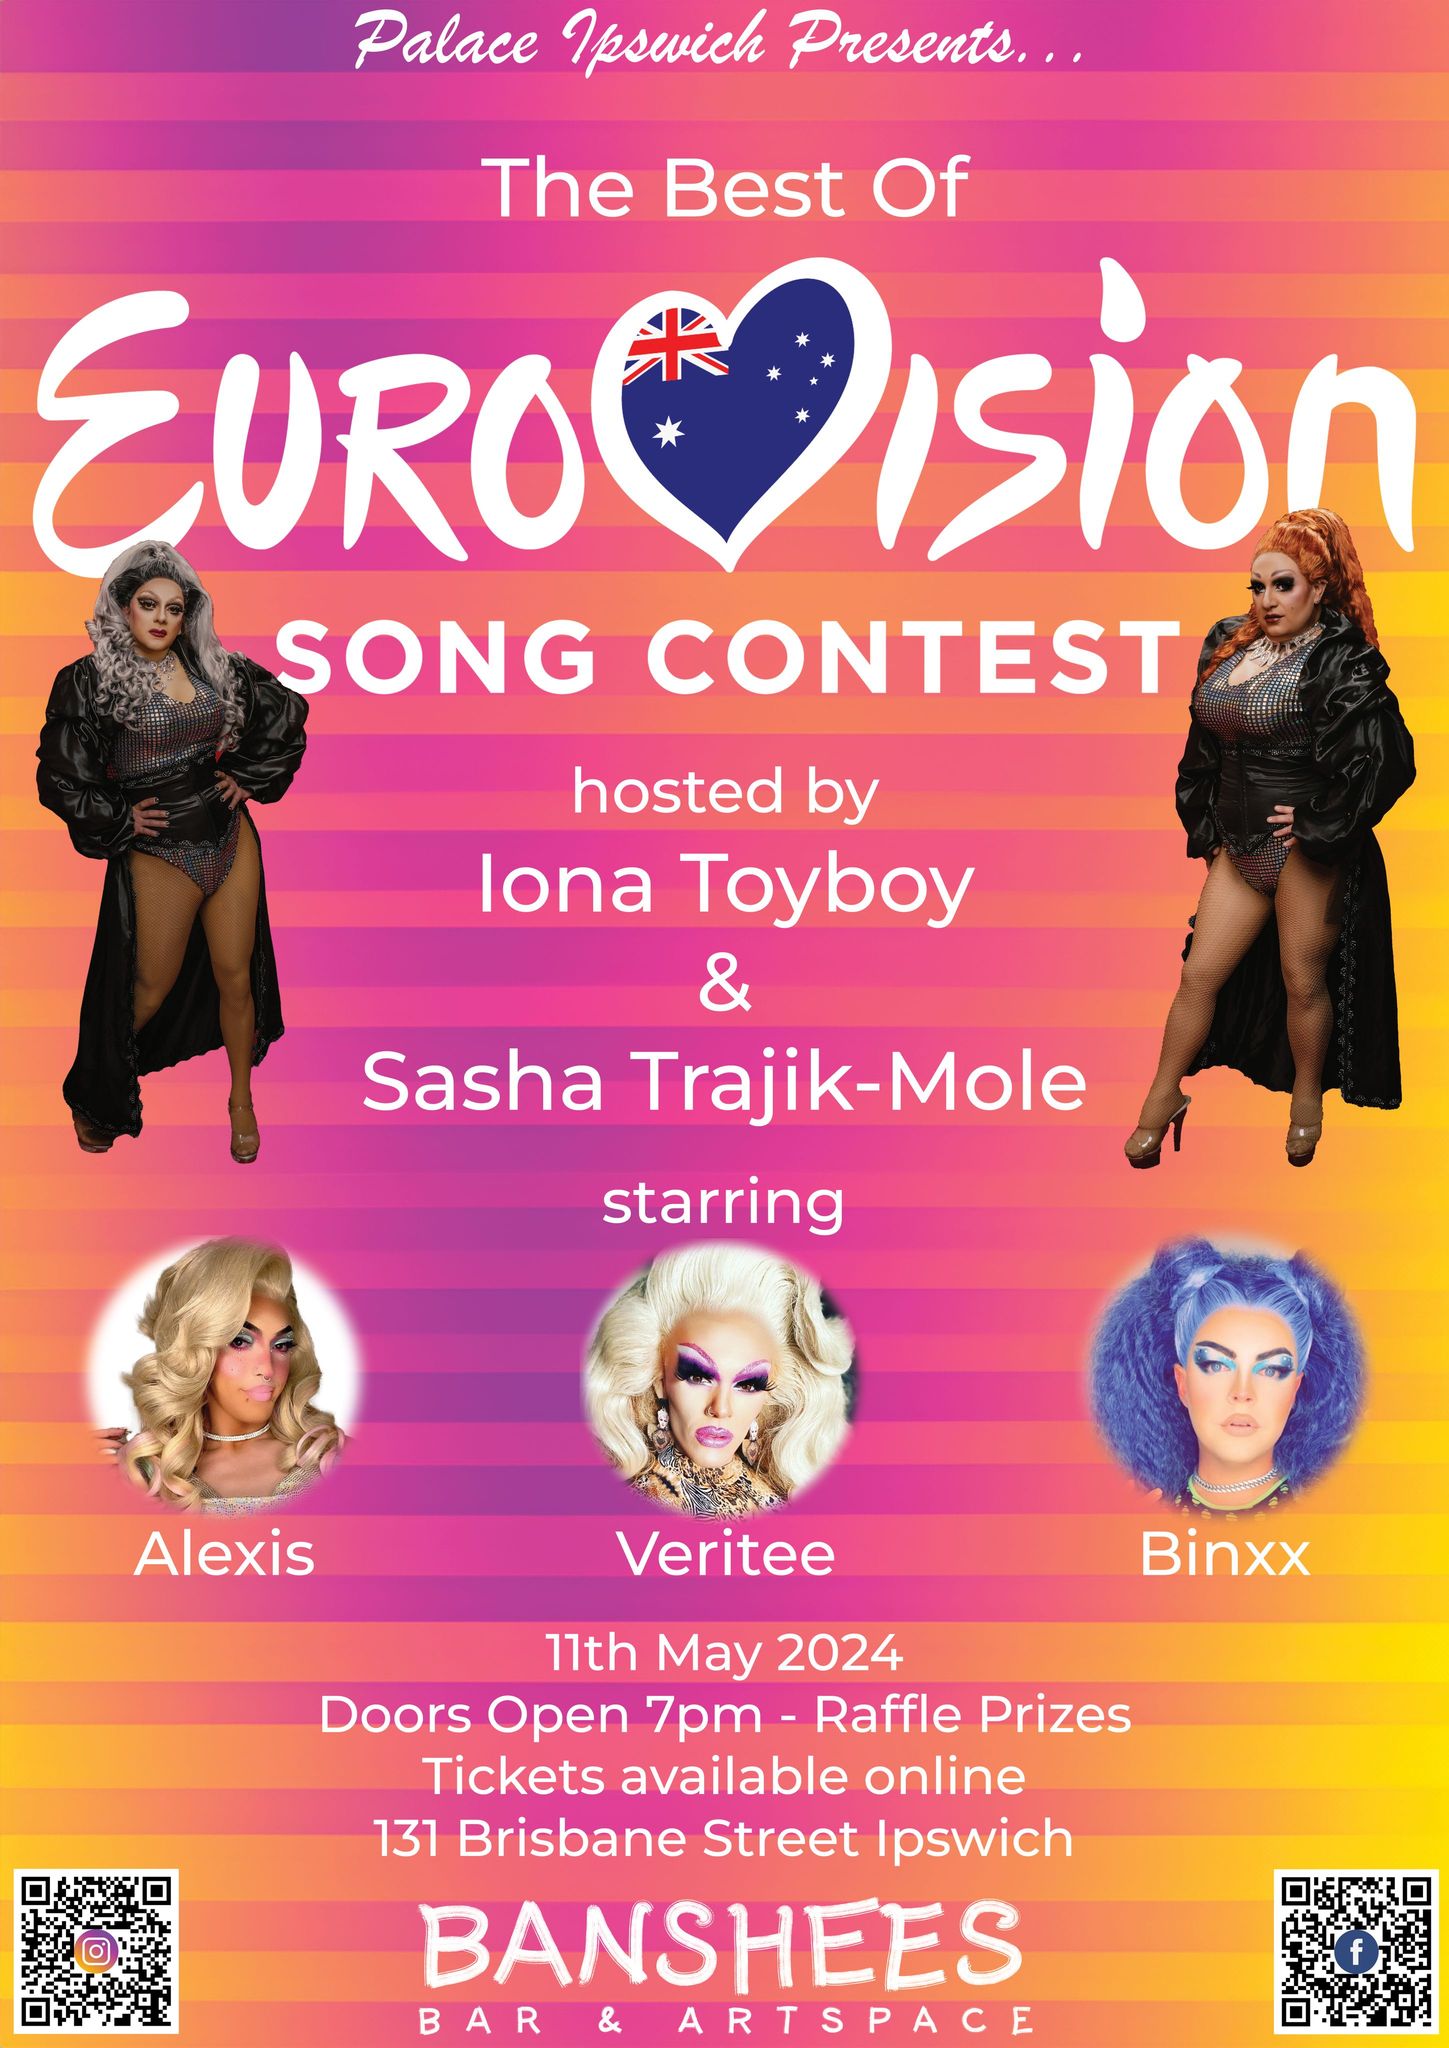 The Best Of Eurovision